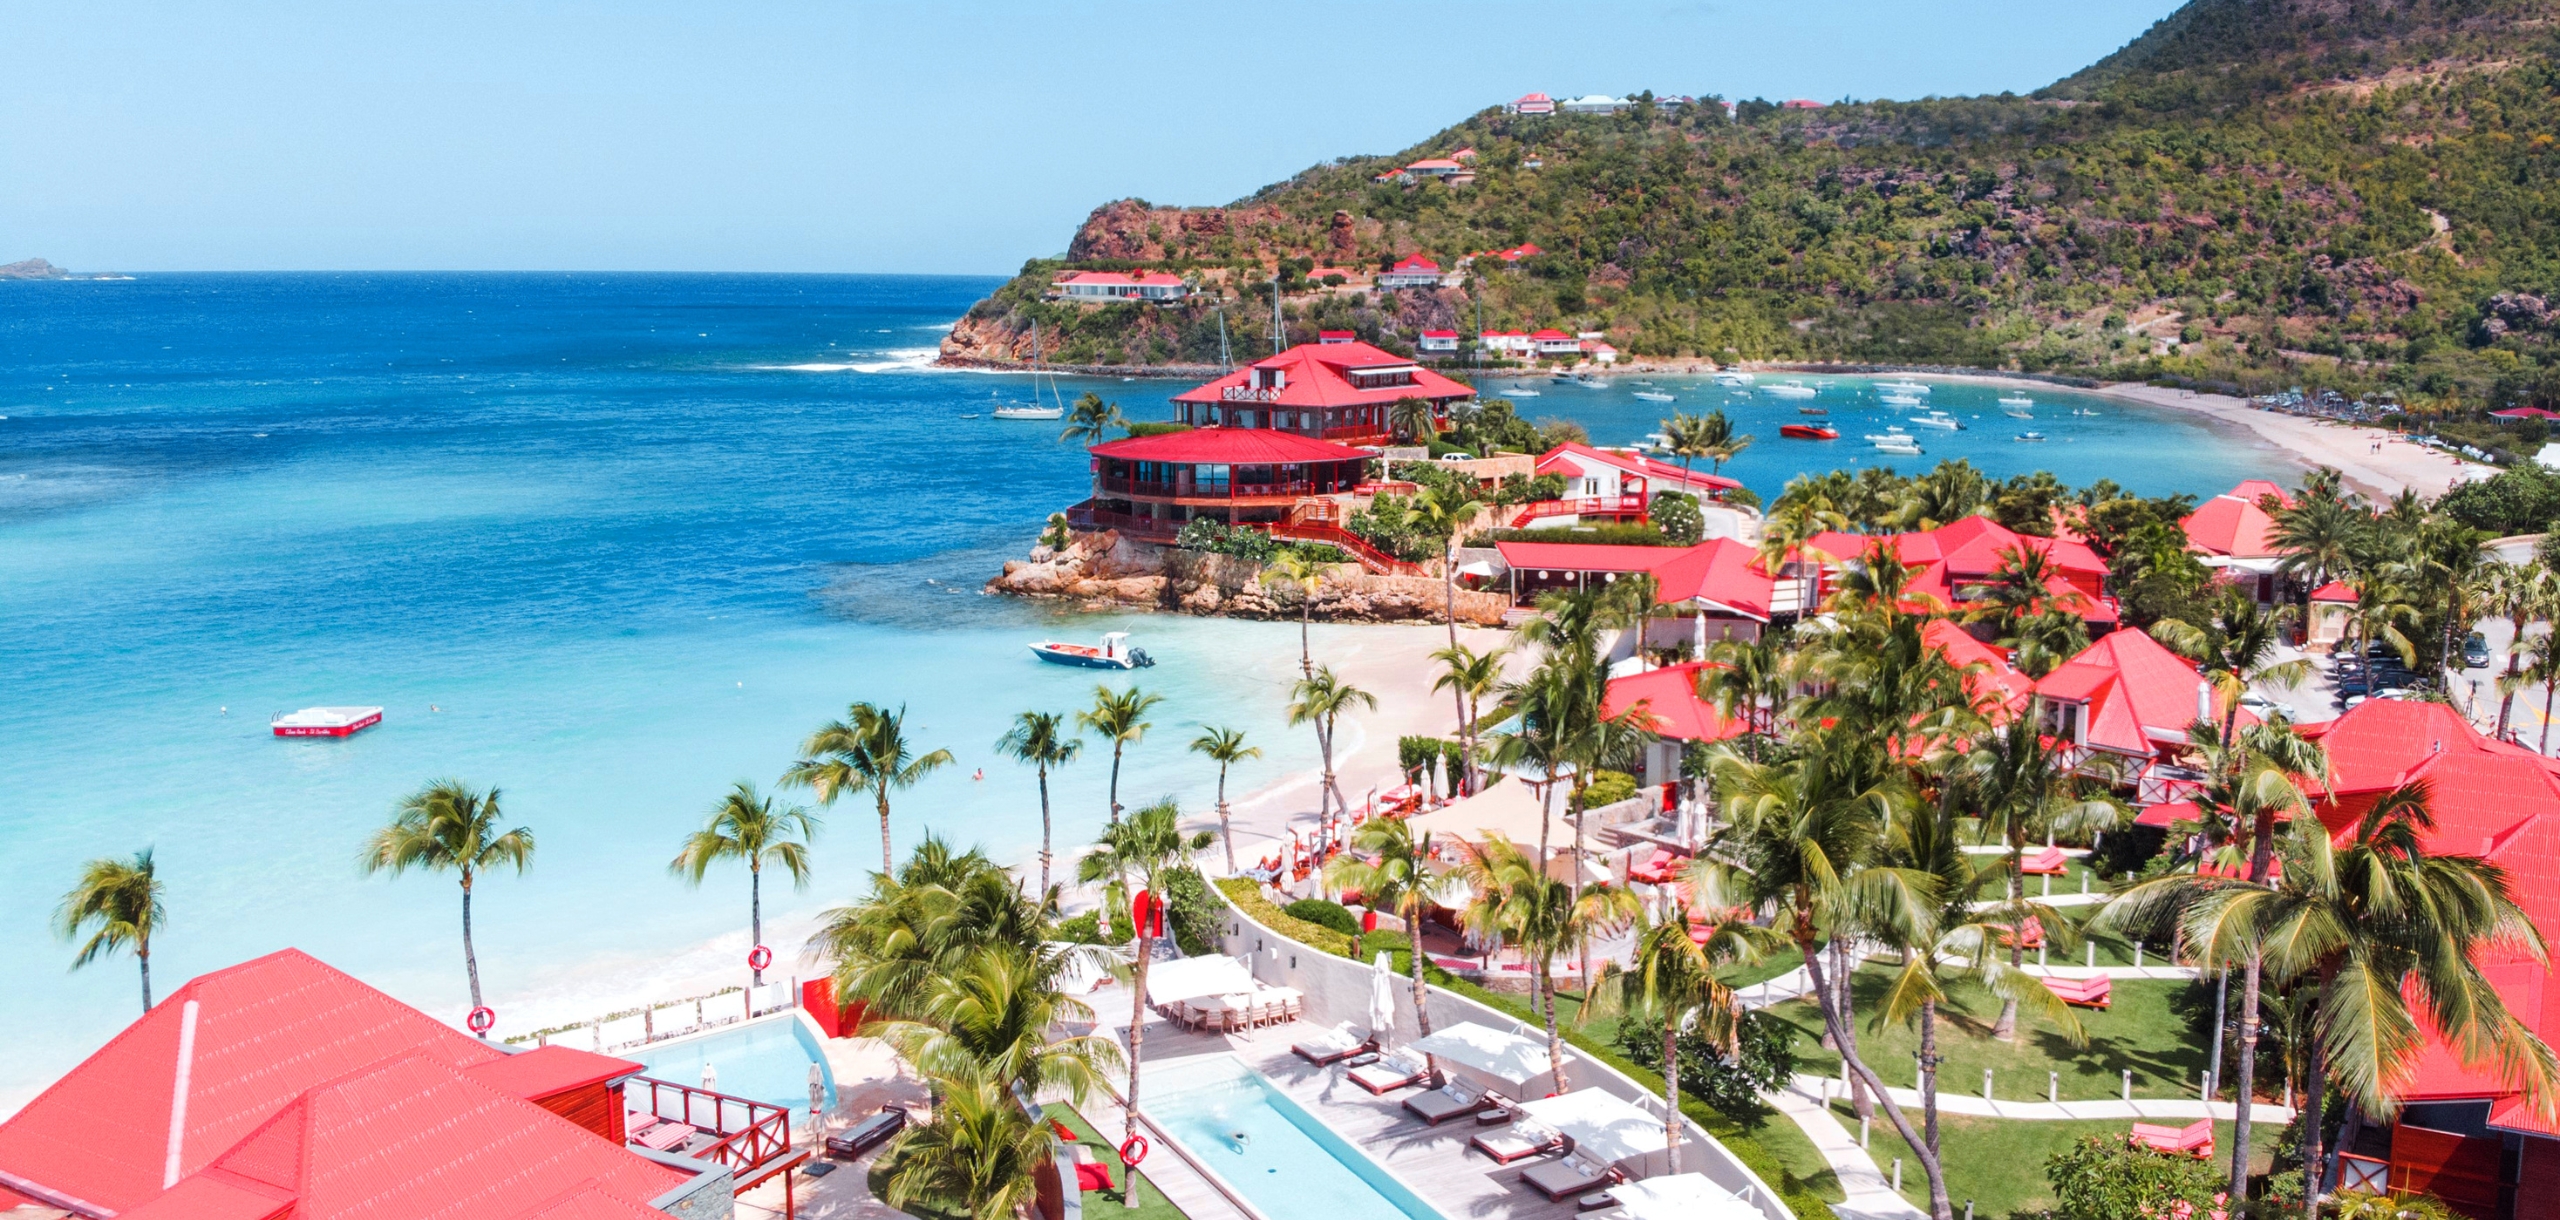 Aerial image of the Eden Rock resort and beach in St. Barths